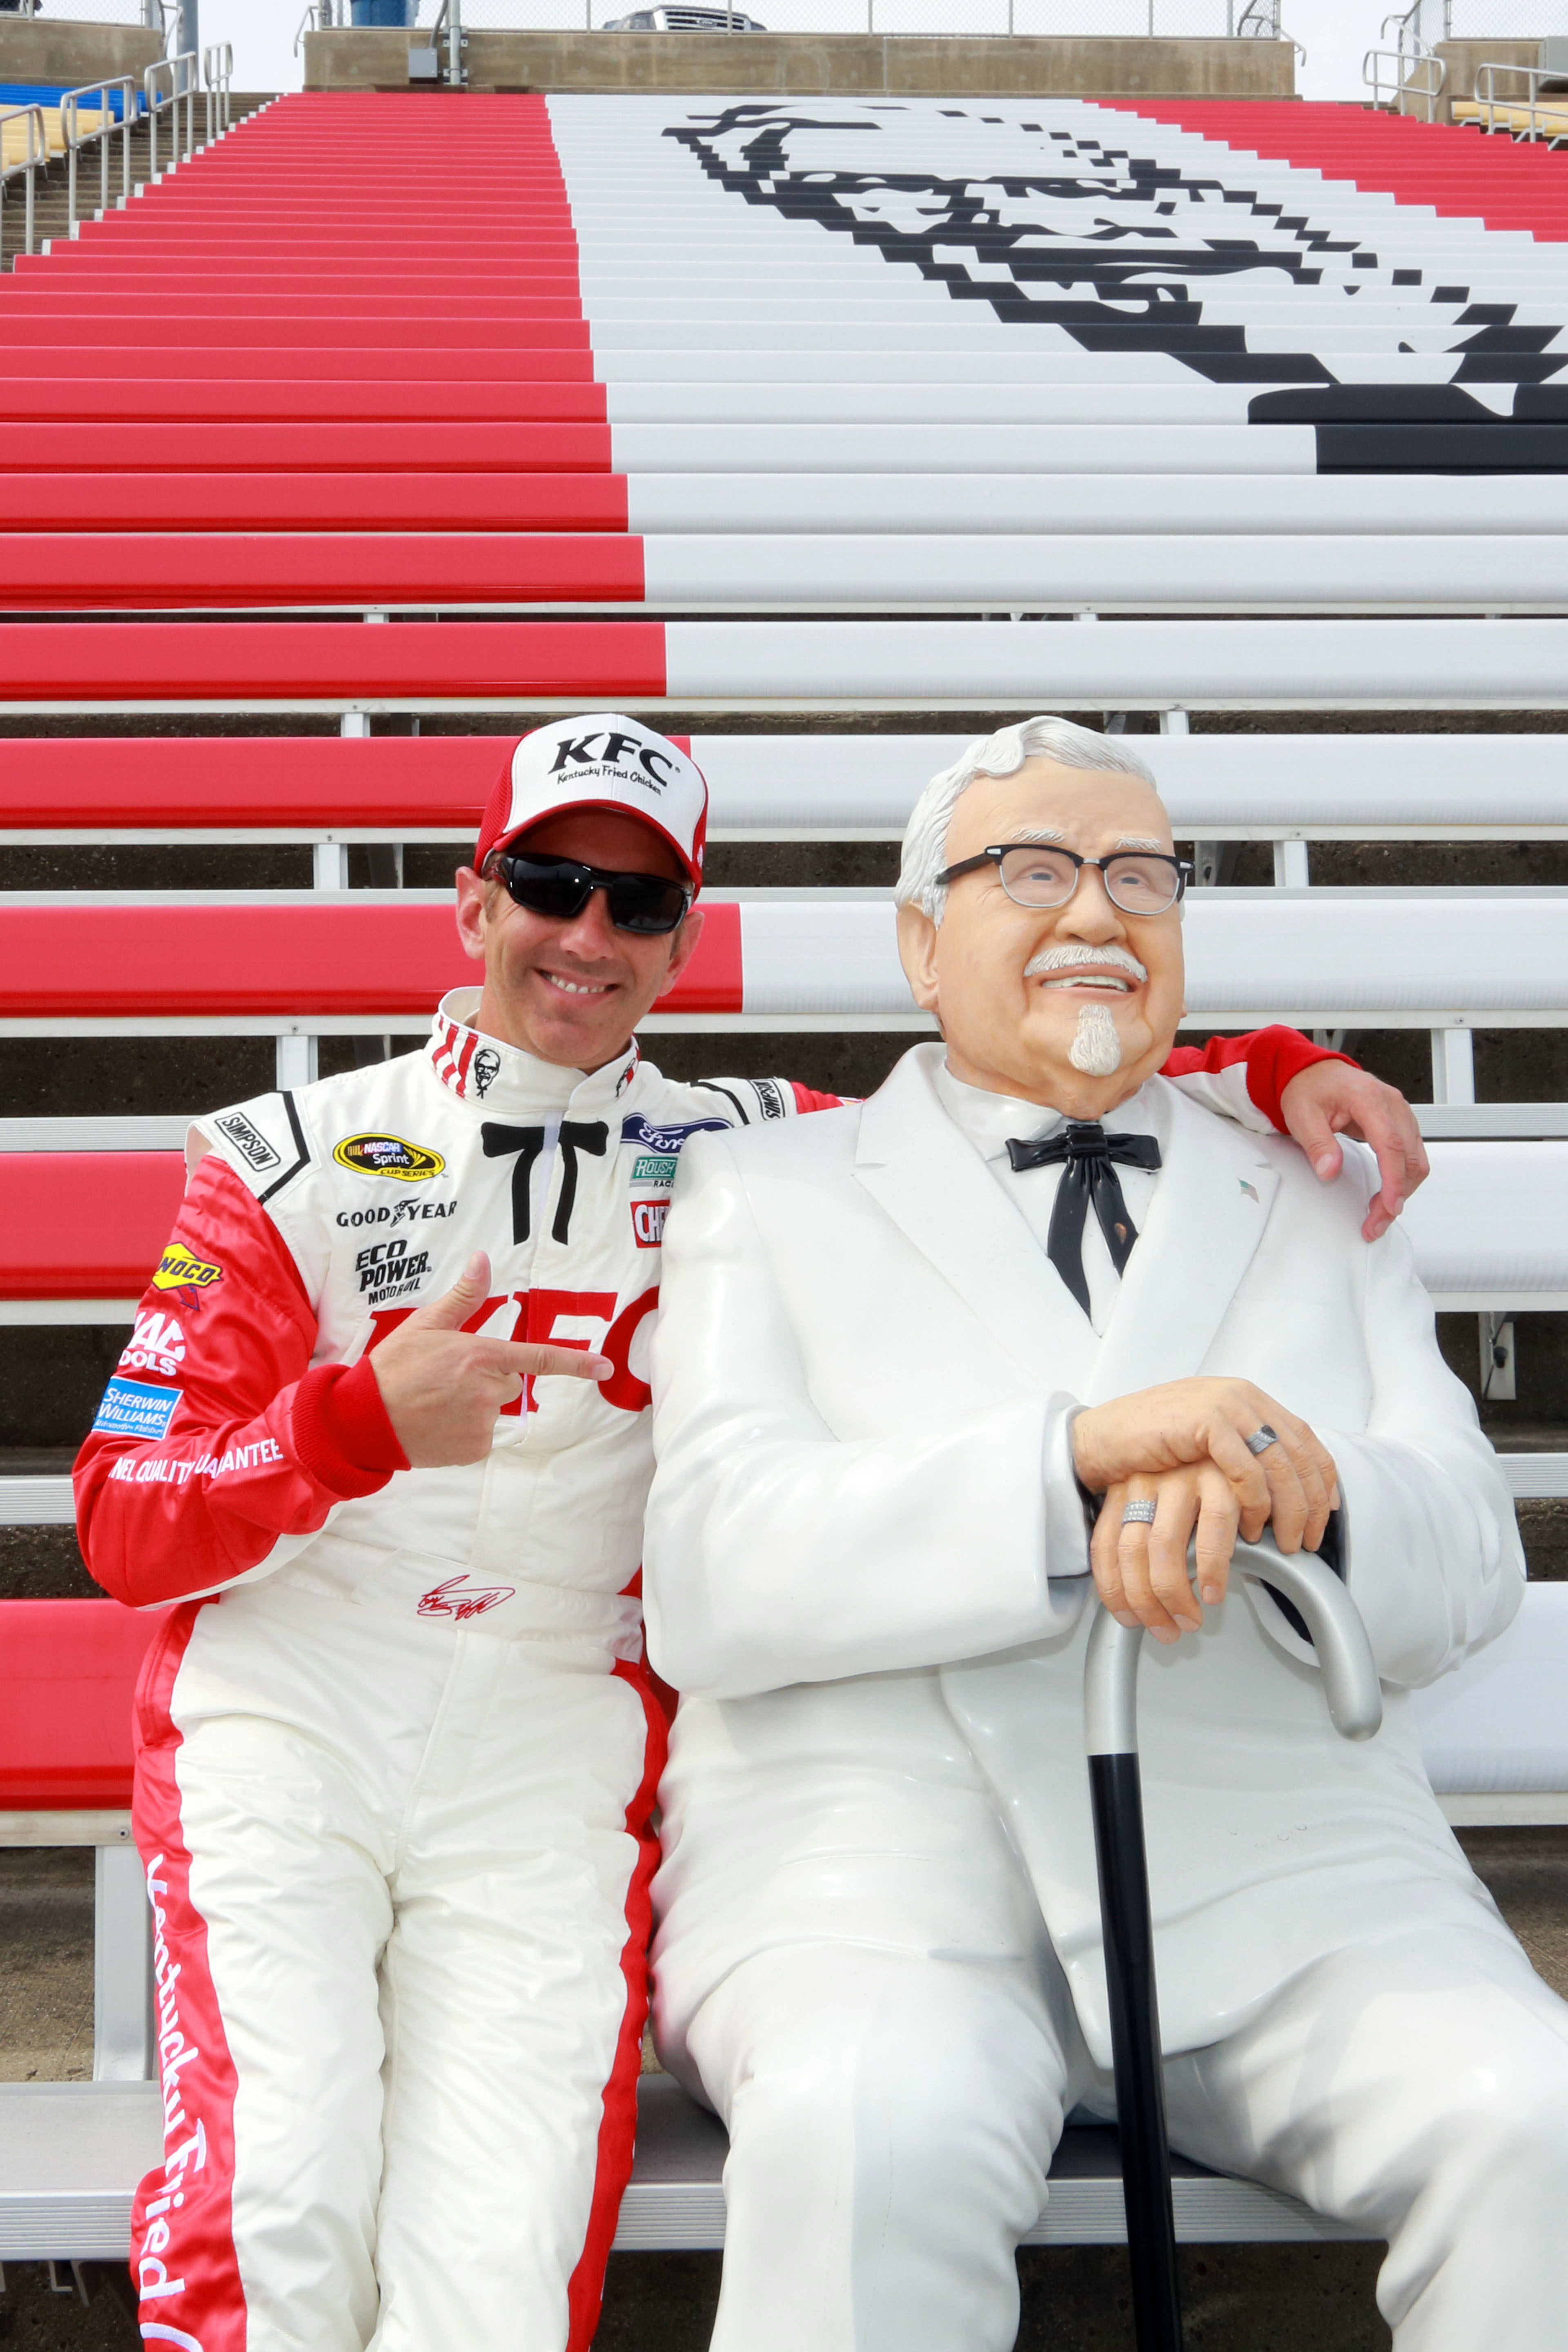 Biffle Earns Top-10 Finish in the KFC Ford at Kentucky Speedway